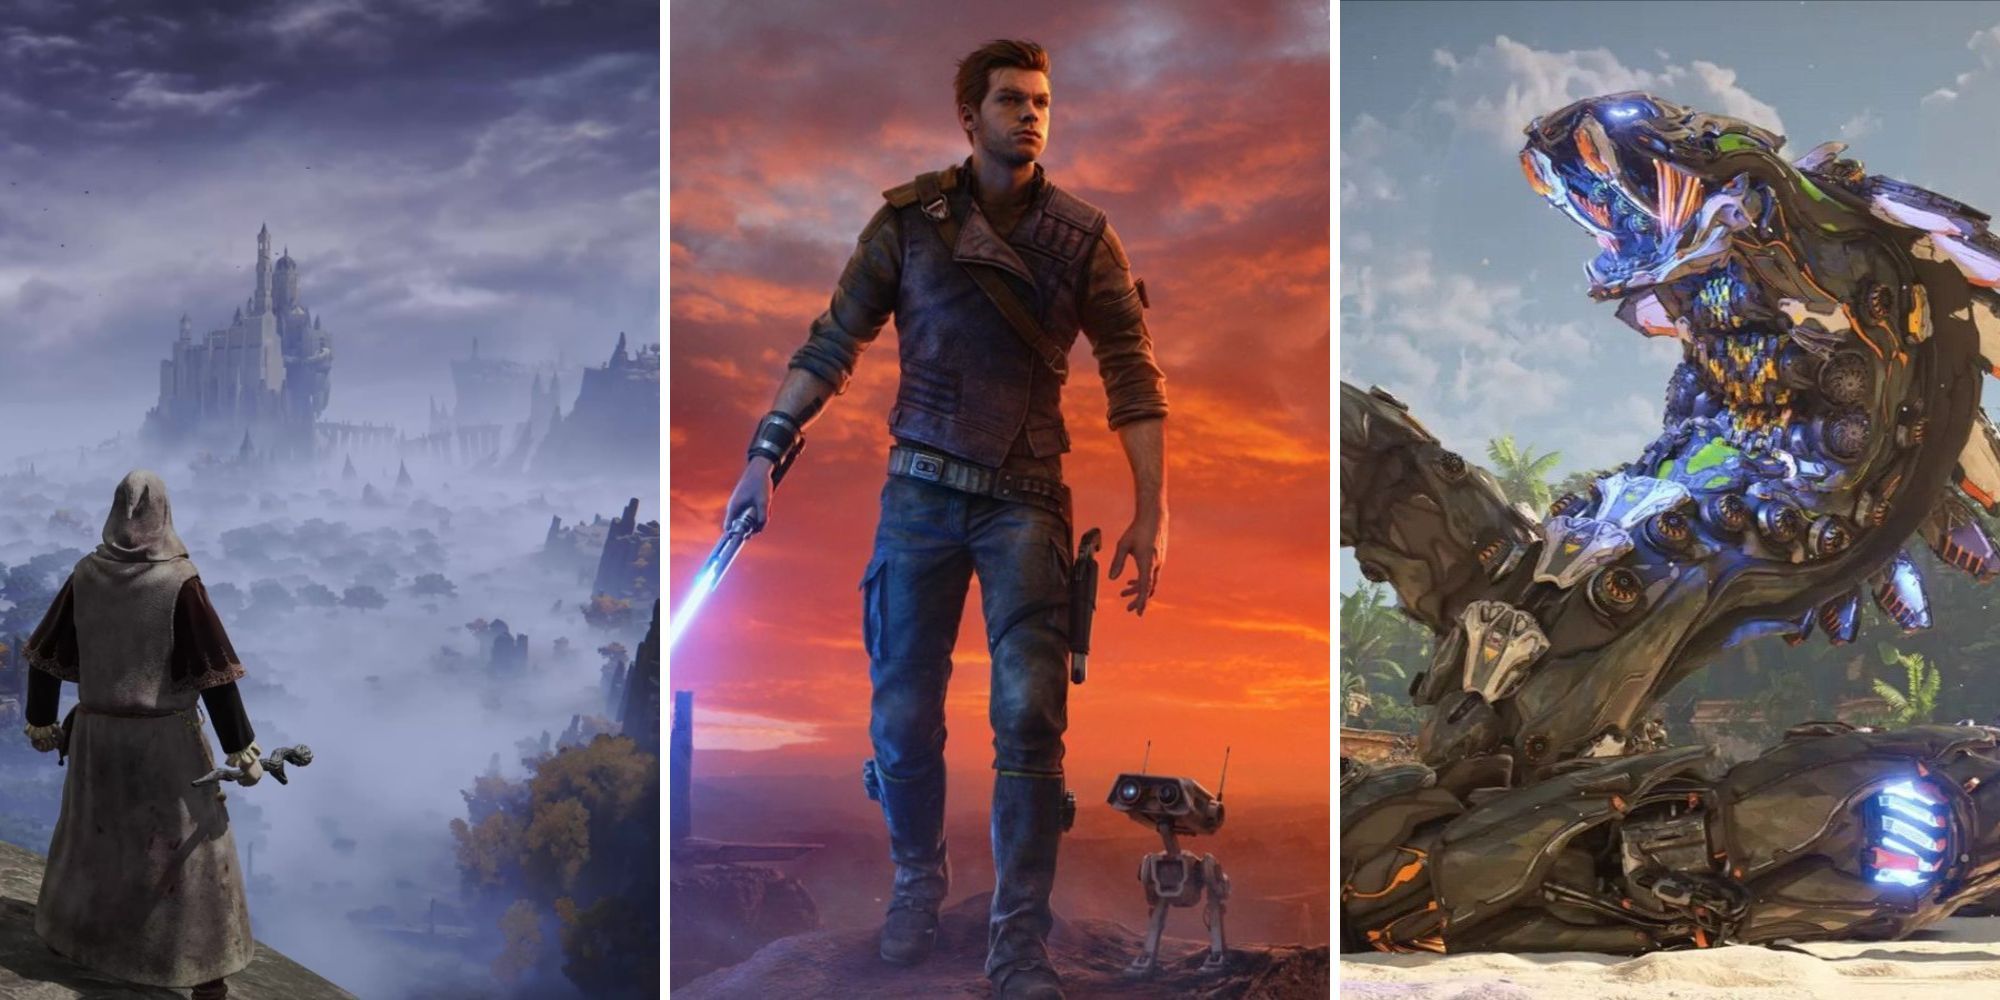 A grid of images from the games Elden Ring, Star Wars Jedi: Survivor, and Horizon: Forbidden West